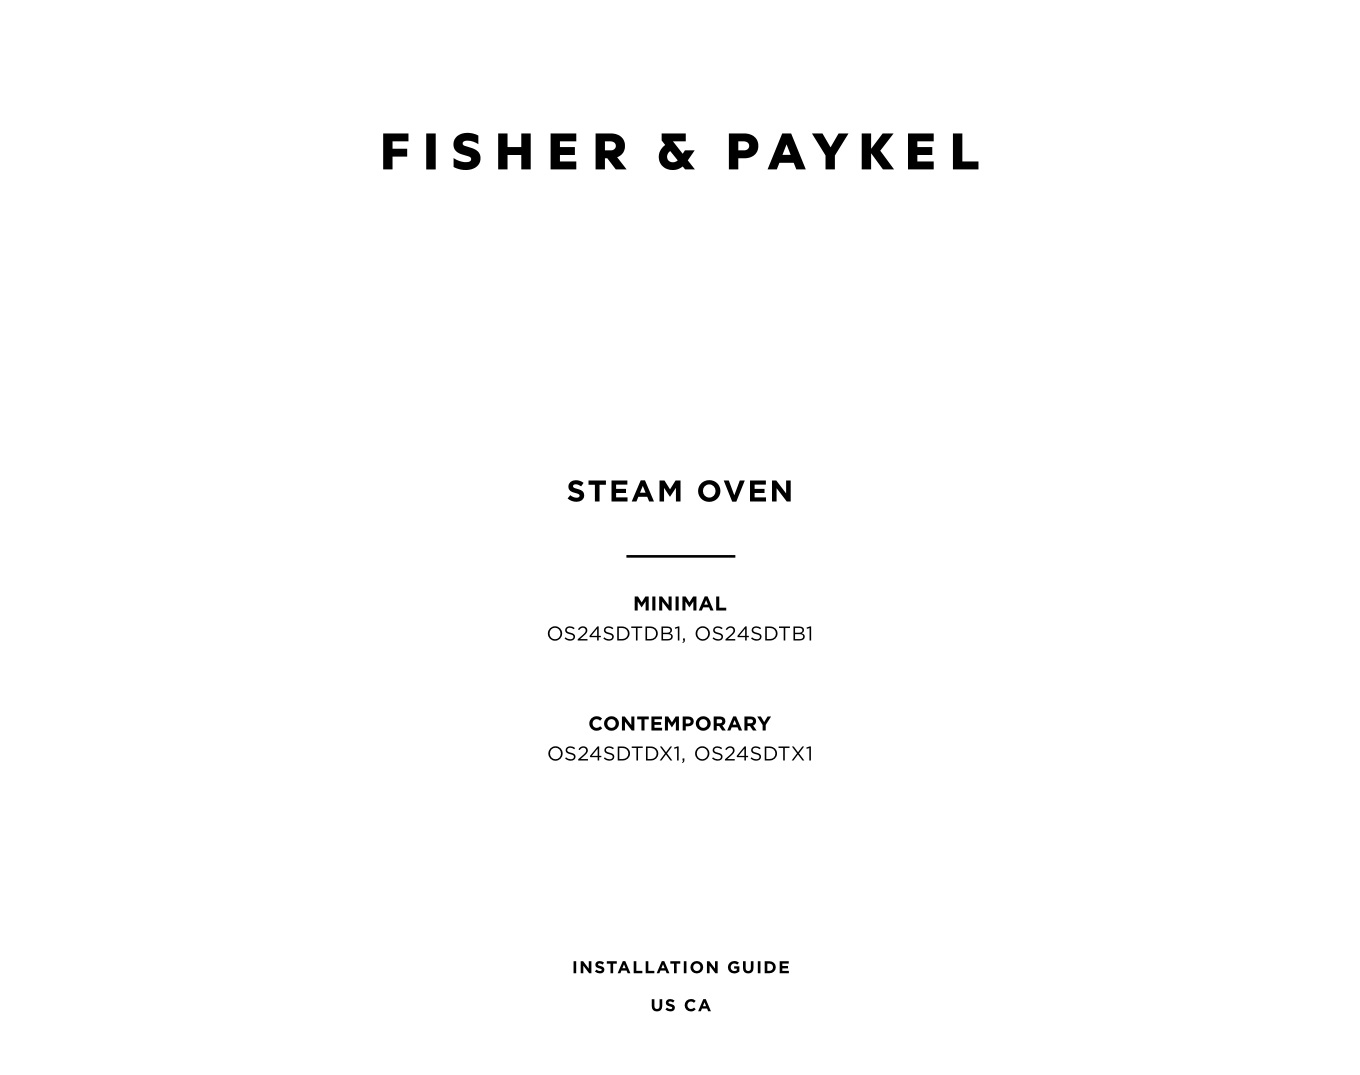 FISHER PAYKEL OS24SDTDB1 Minimal Series 24 Inch Electric Single Wall Steam Installation Guide